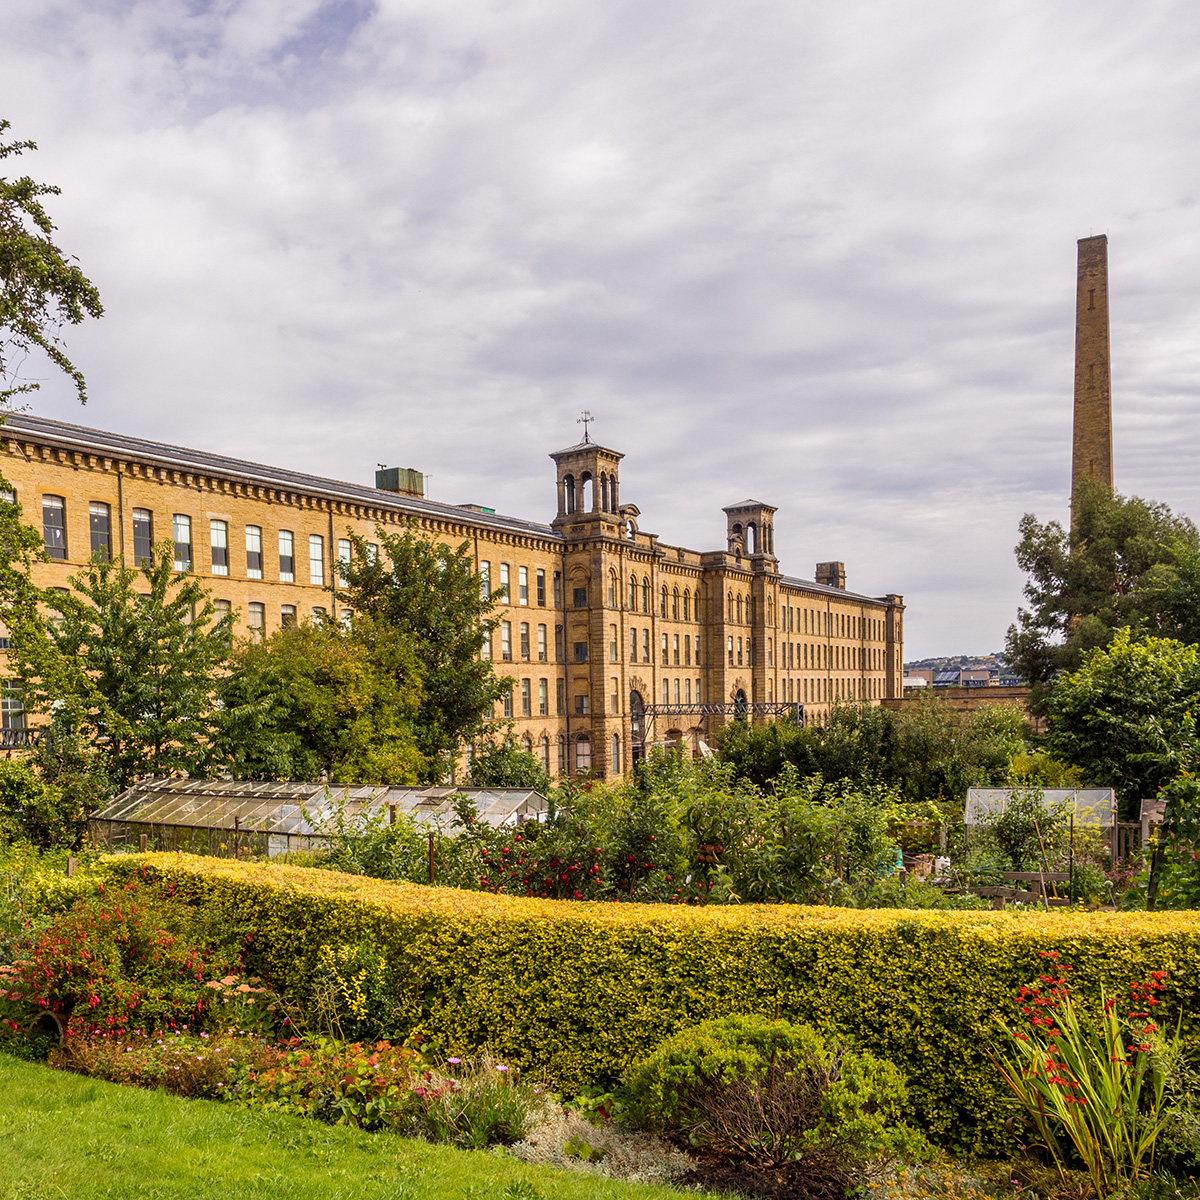 Salts mill and chimney from the village - Ssaltaire West Yorkshire UK